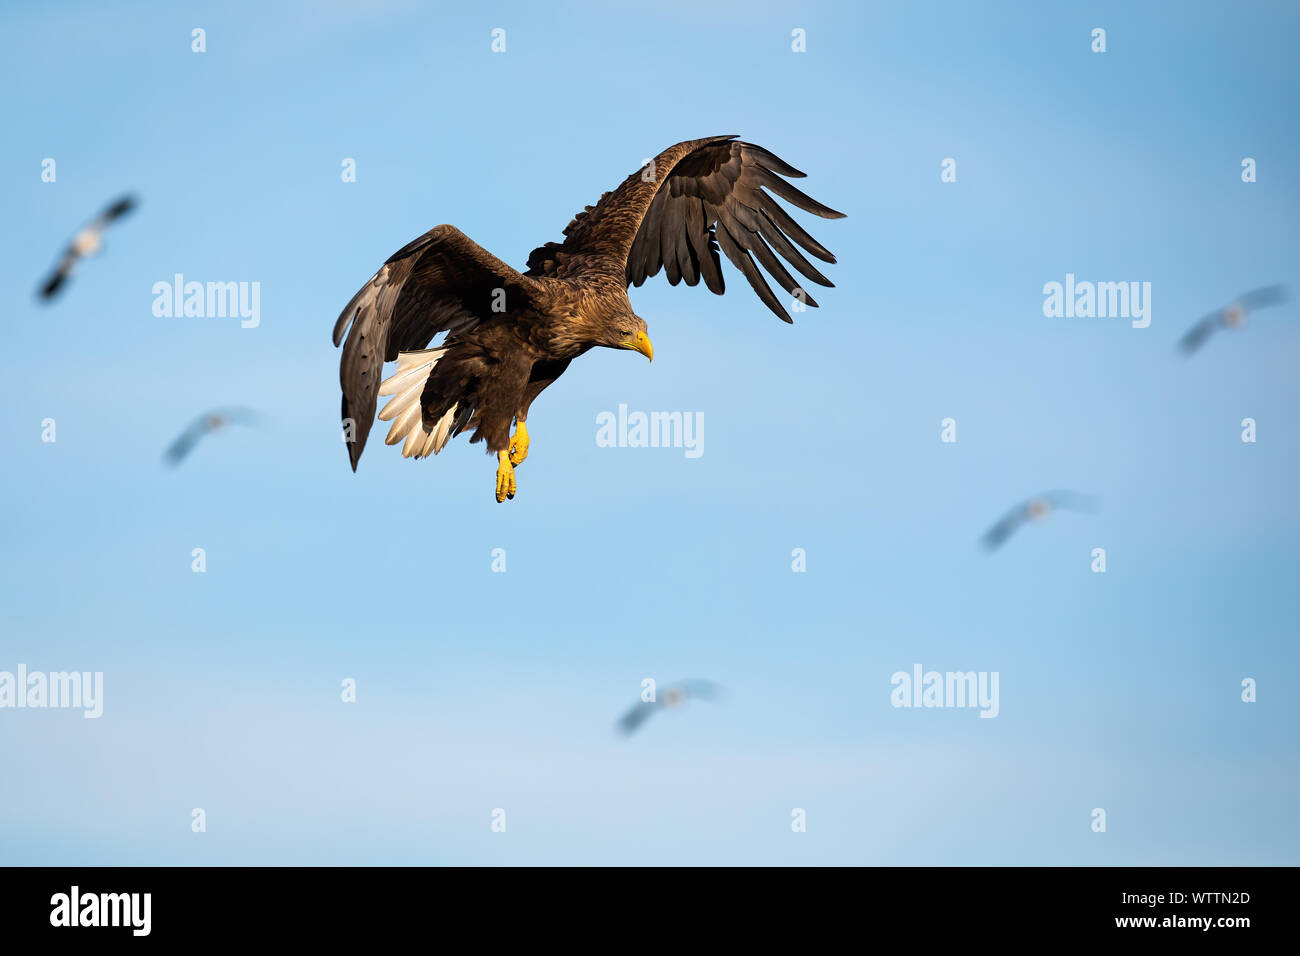 Adult white-tailed eagle, haliaeetus albicilla, flying against blue skies at sunset looking down. Wild bird of prey hunting in nature with flock of bi Stock Photo